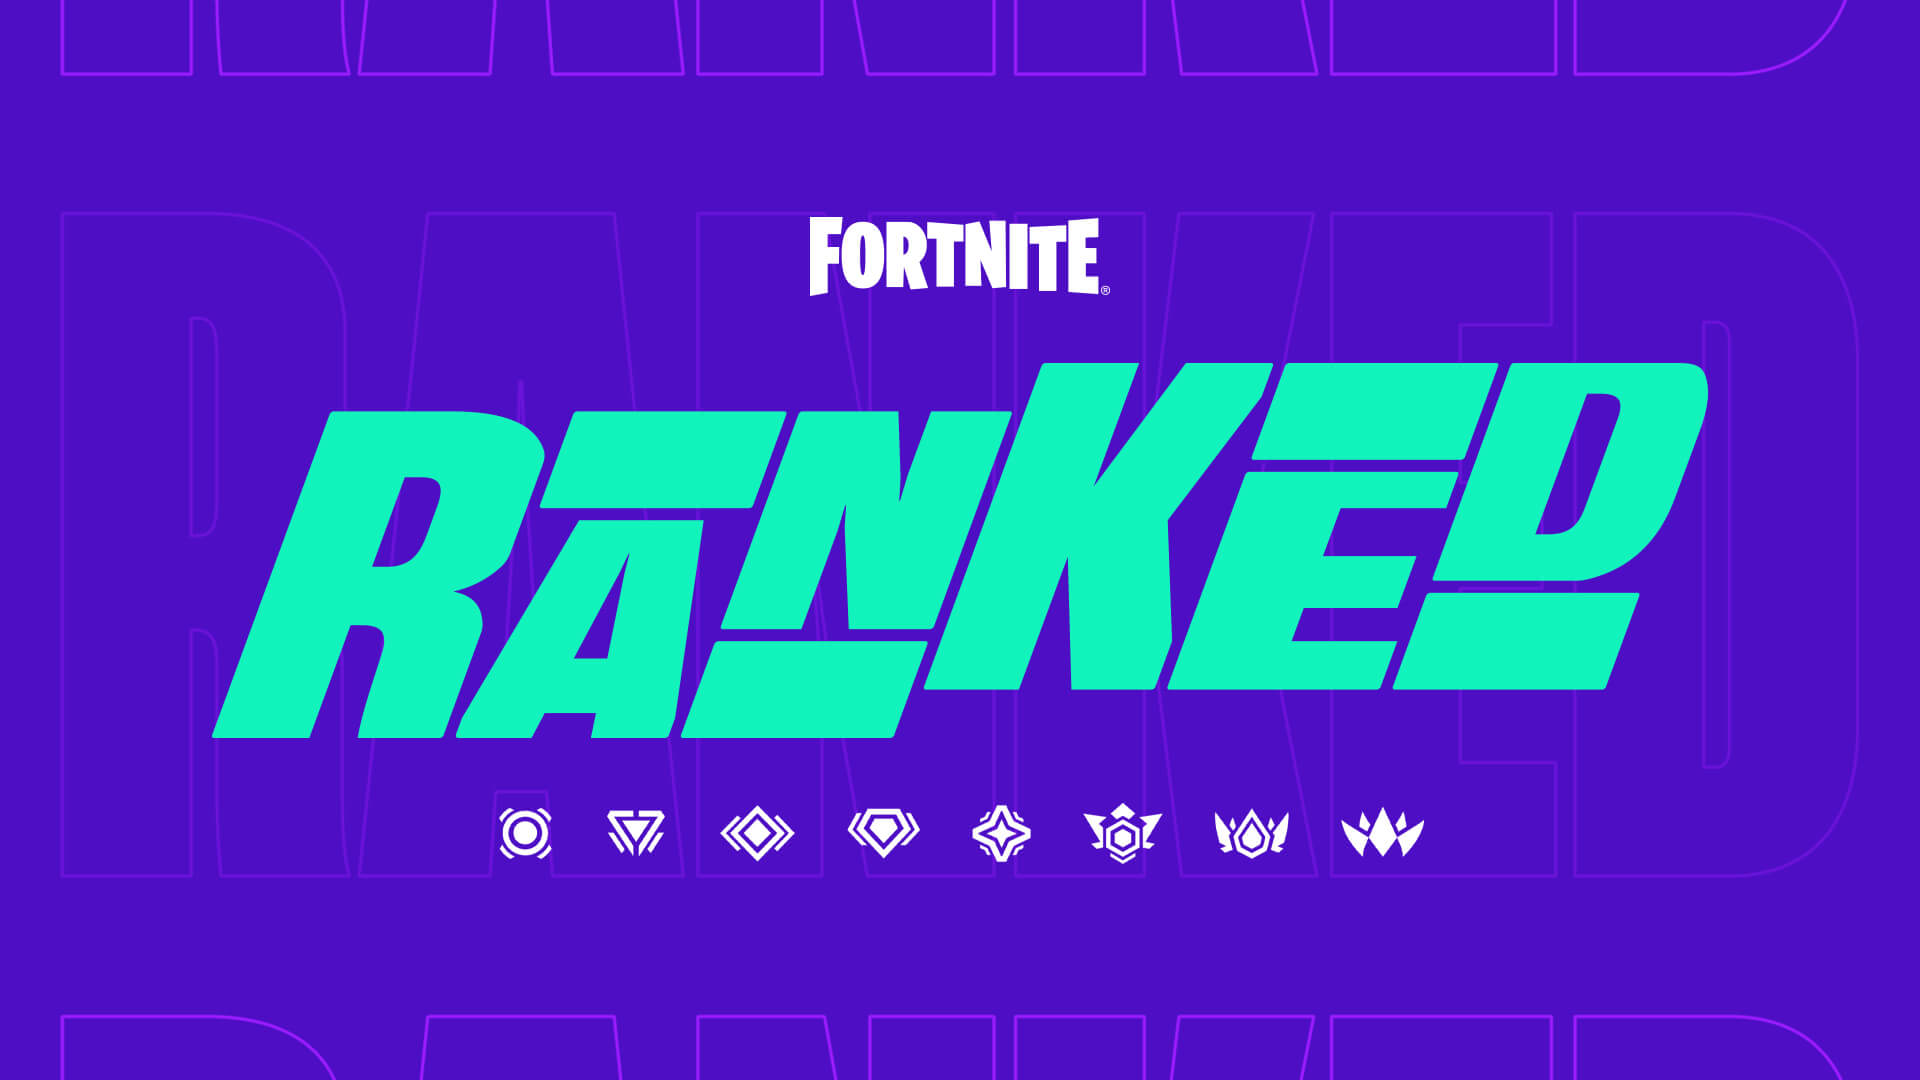 Fortnite Ranked Chapter 4 Season 3 Patch Notes - Rank Reset, Changes and  More